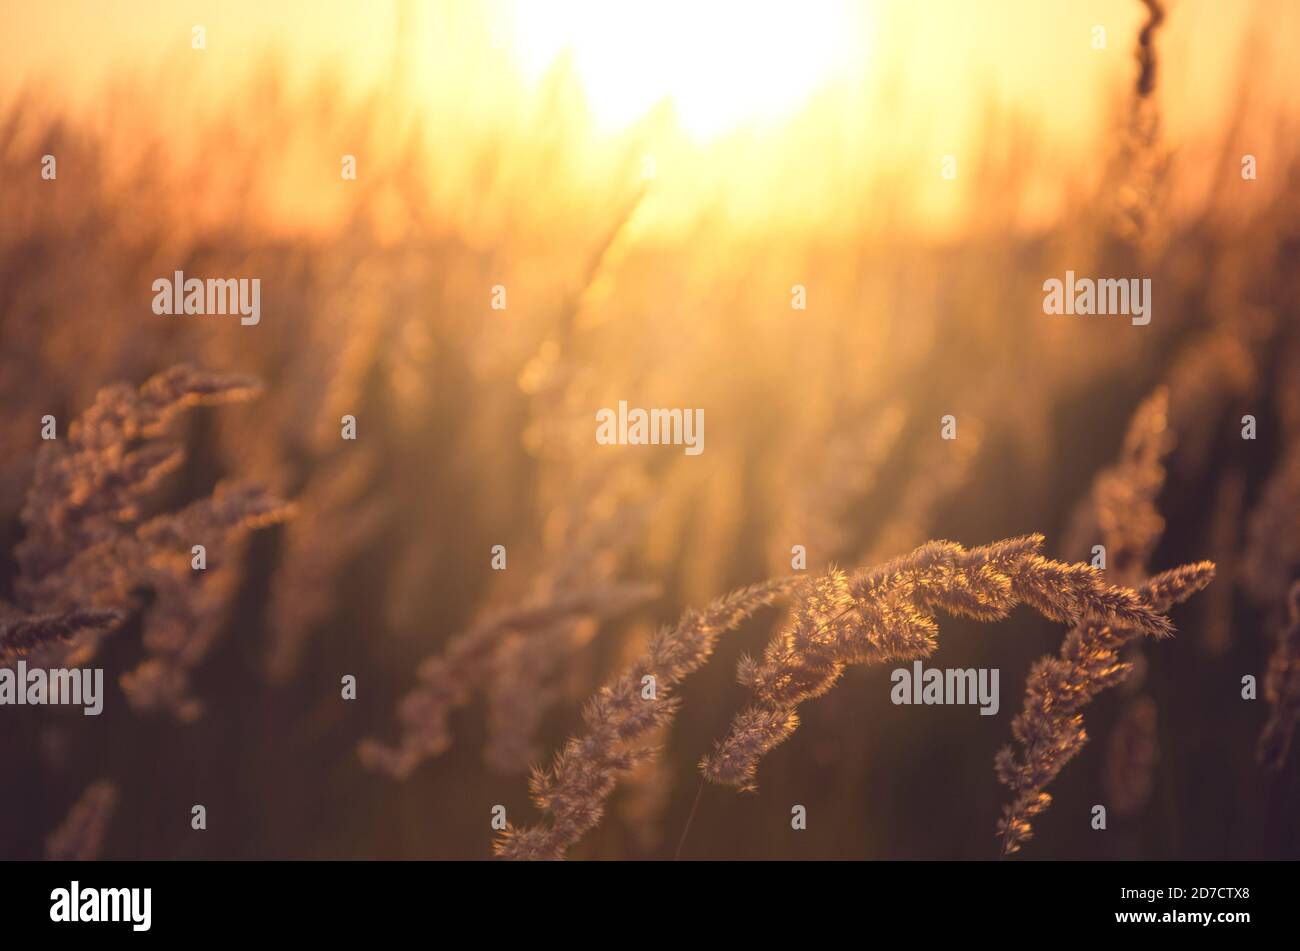 Sunny view of grasses illuminated by the warm golden light of setting sun. Stock Photo